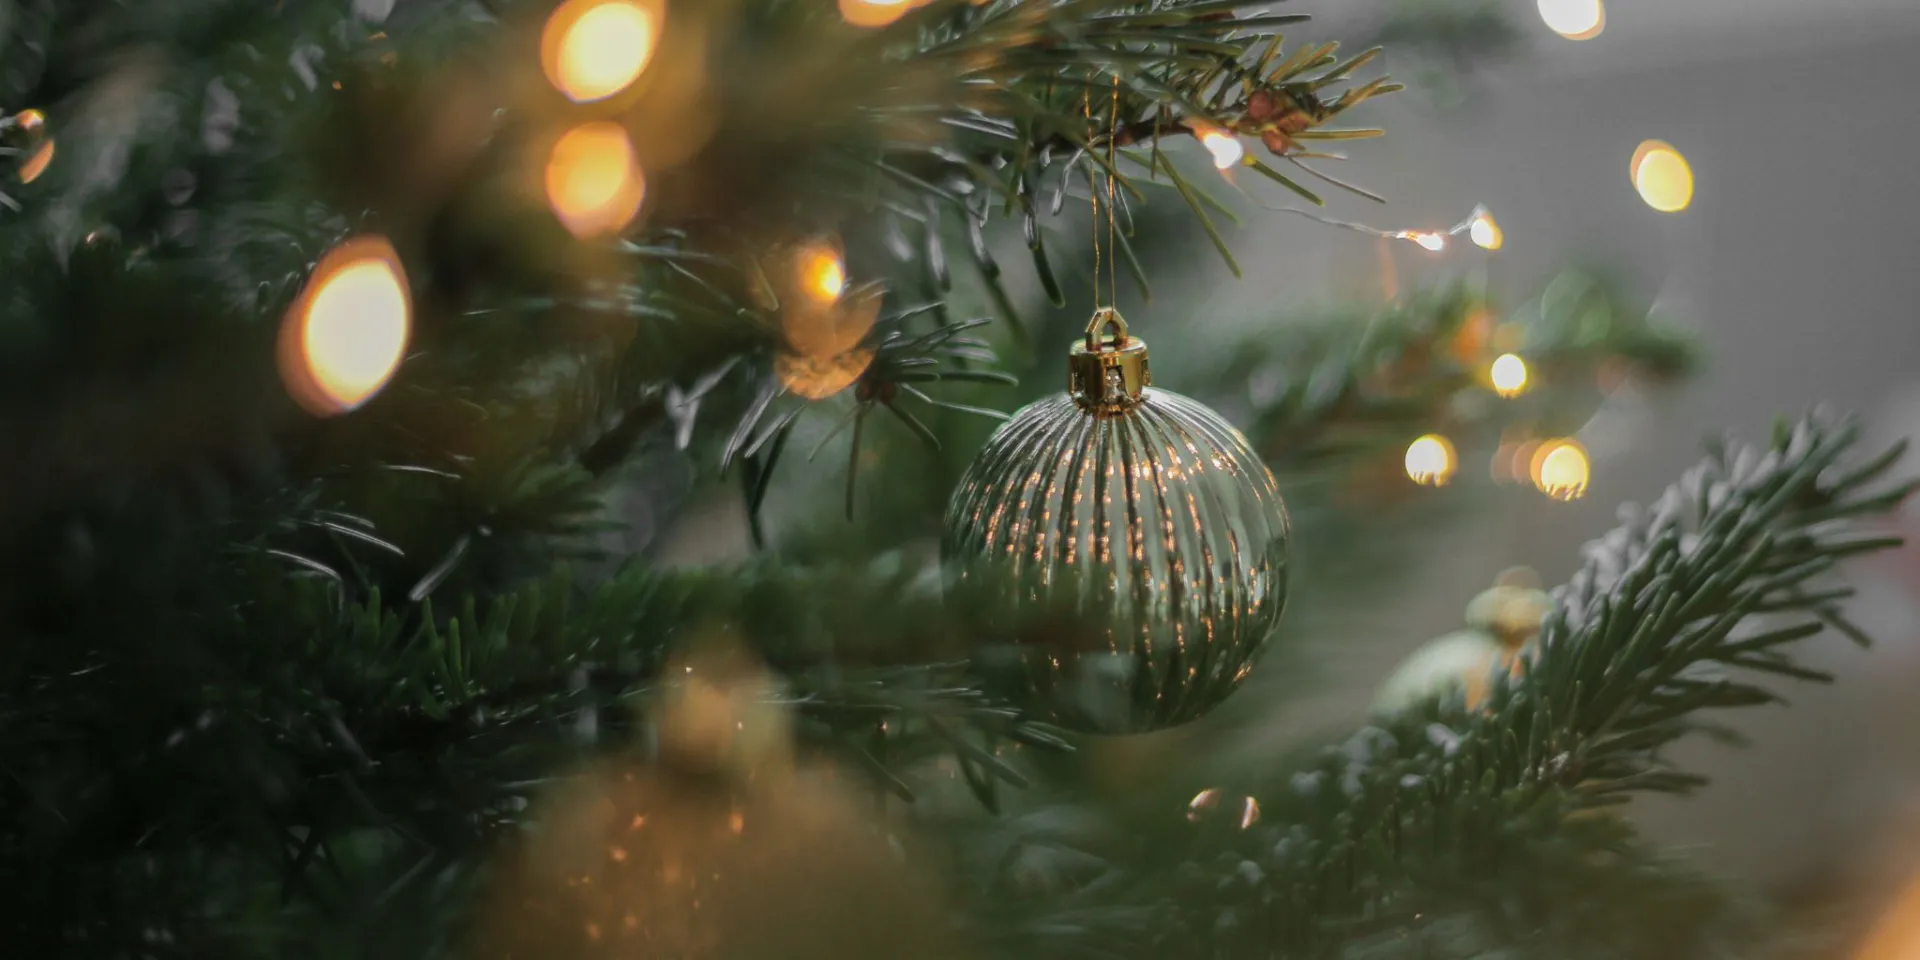 Soft focus Christmas tree, bauble and lights